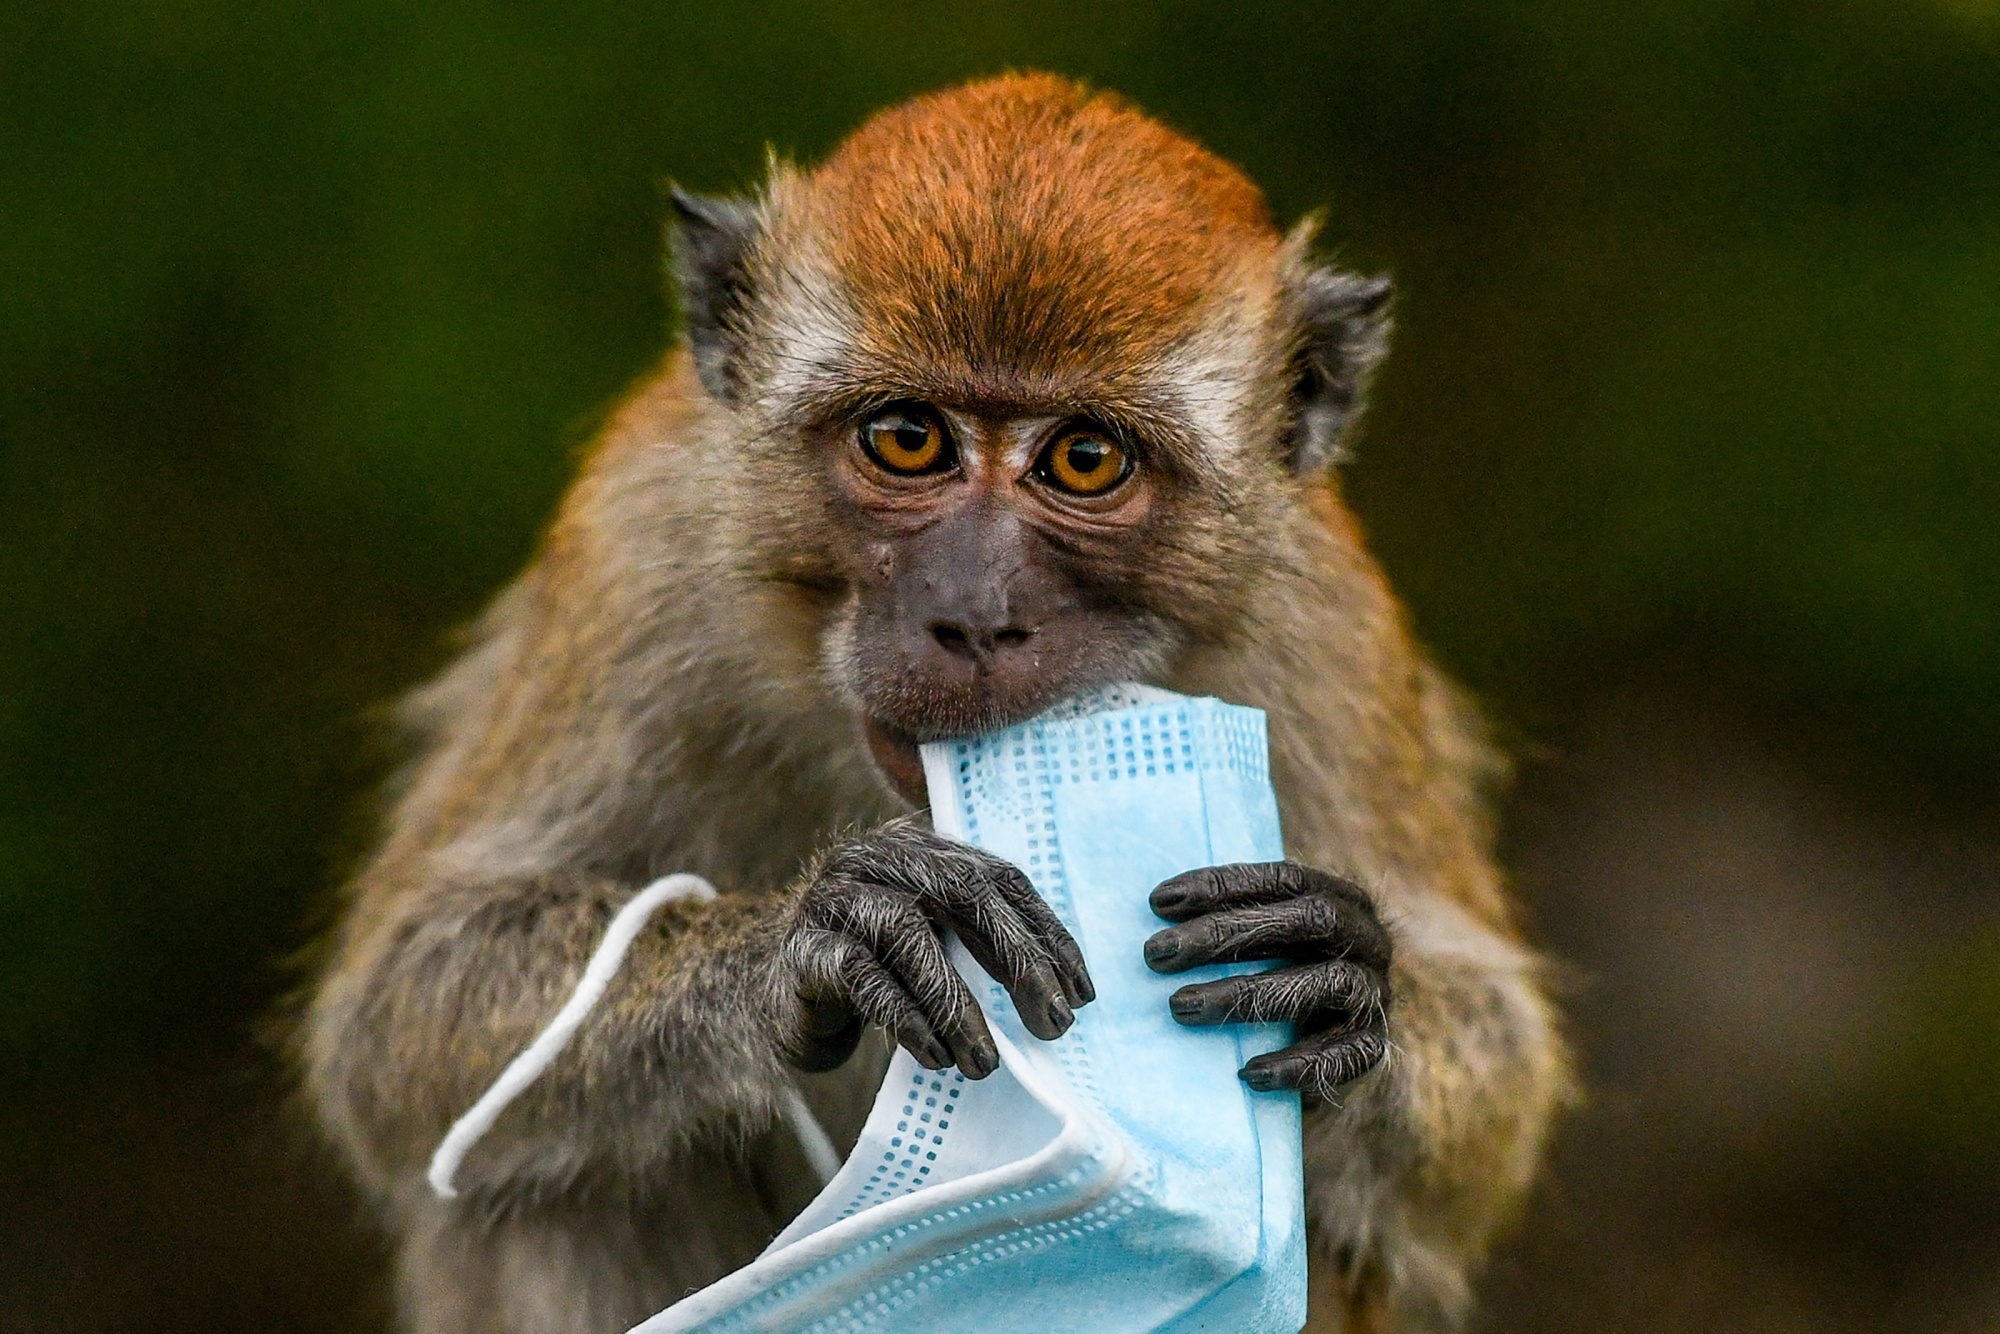 A Natural Disaster Made Monkeys Age Faster